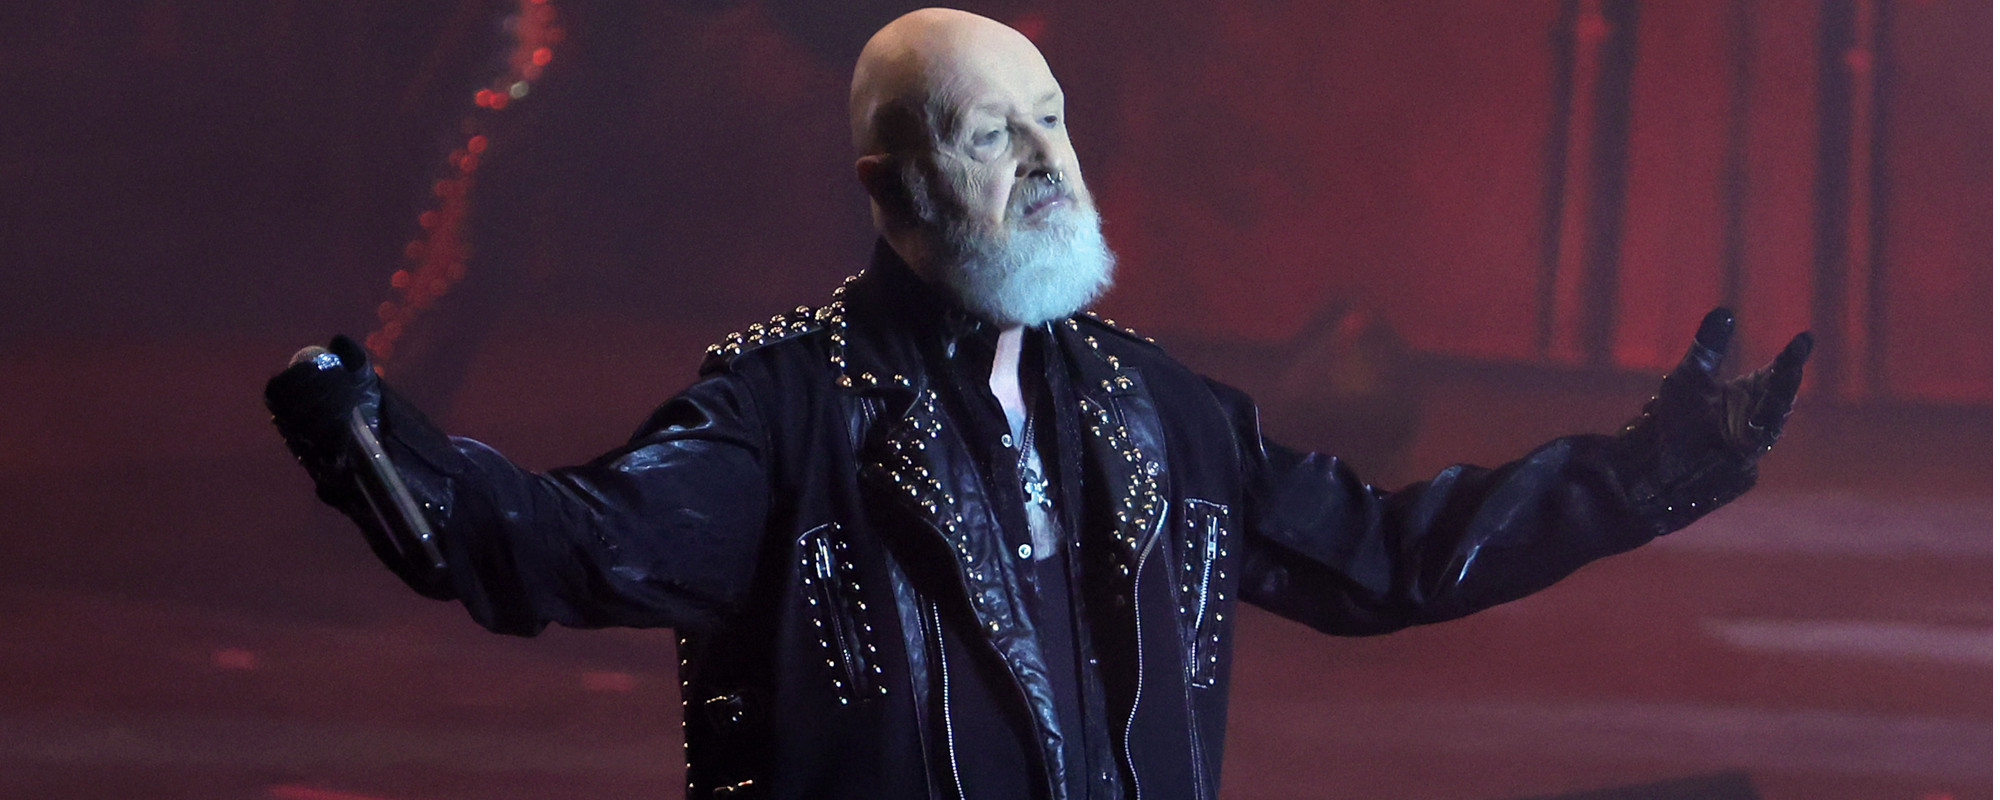 Judas Priest Singer Rob Halford Says Metal World Helped Him Through Terrible Battles of Loneliness